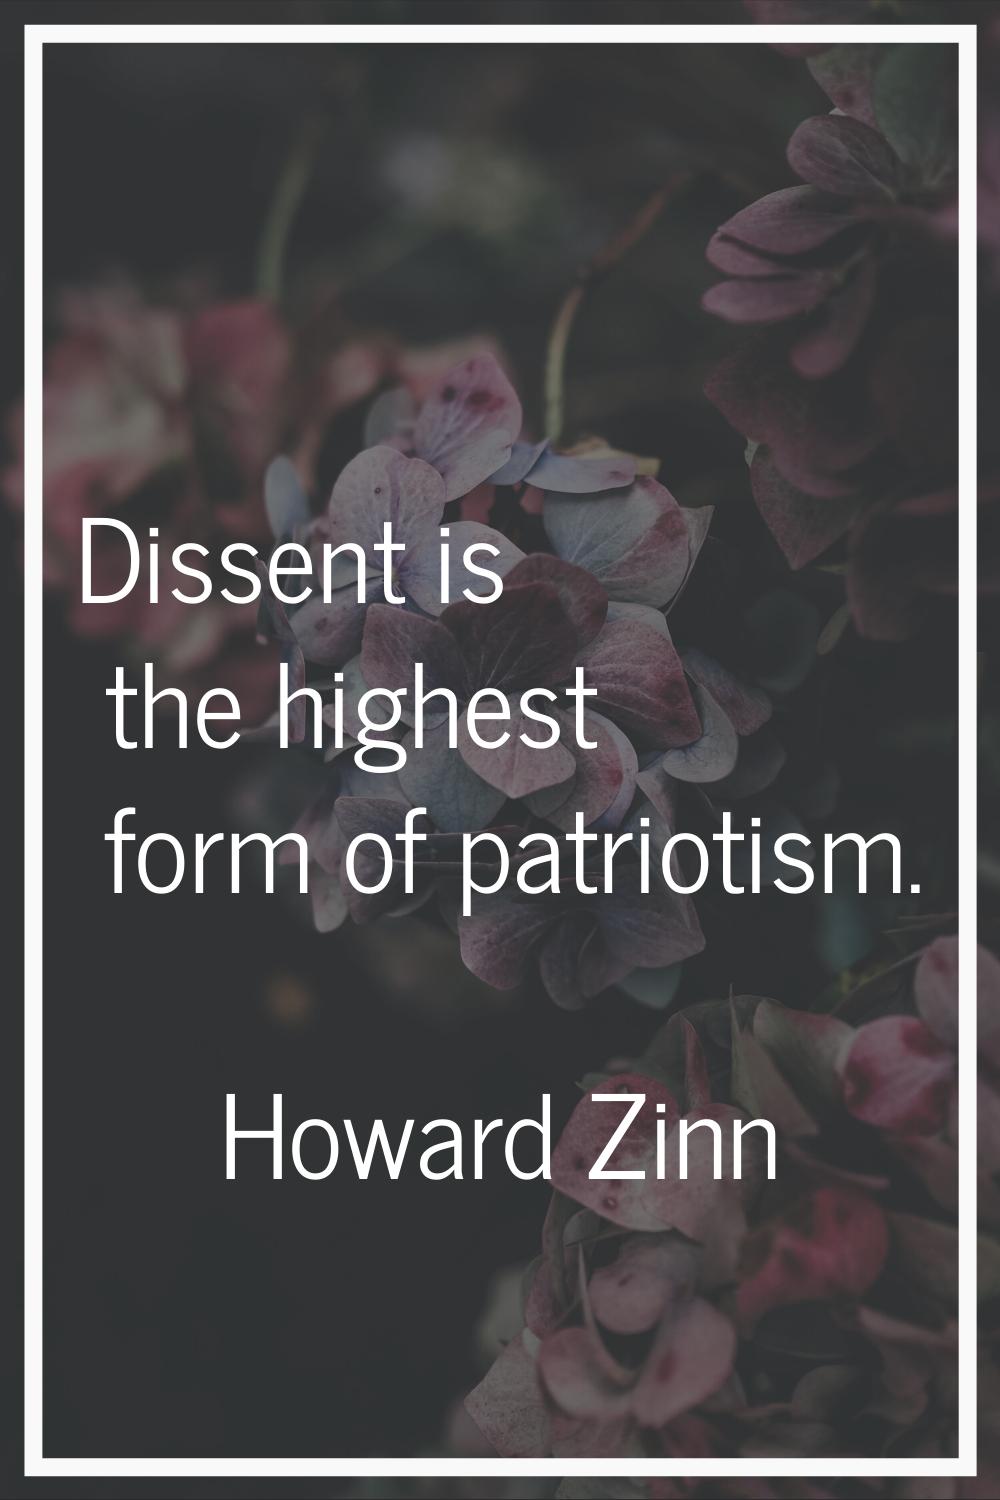 Dissent is the highest form of patriotism.